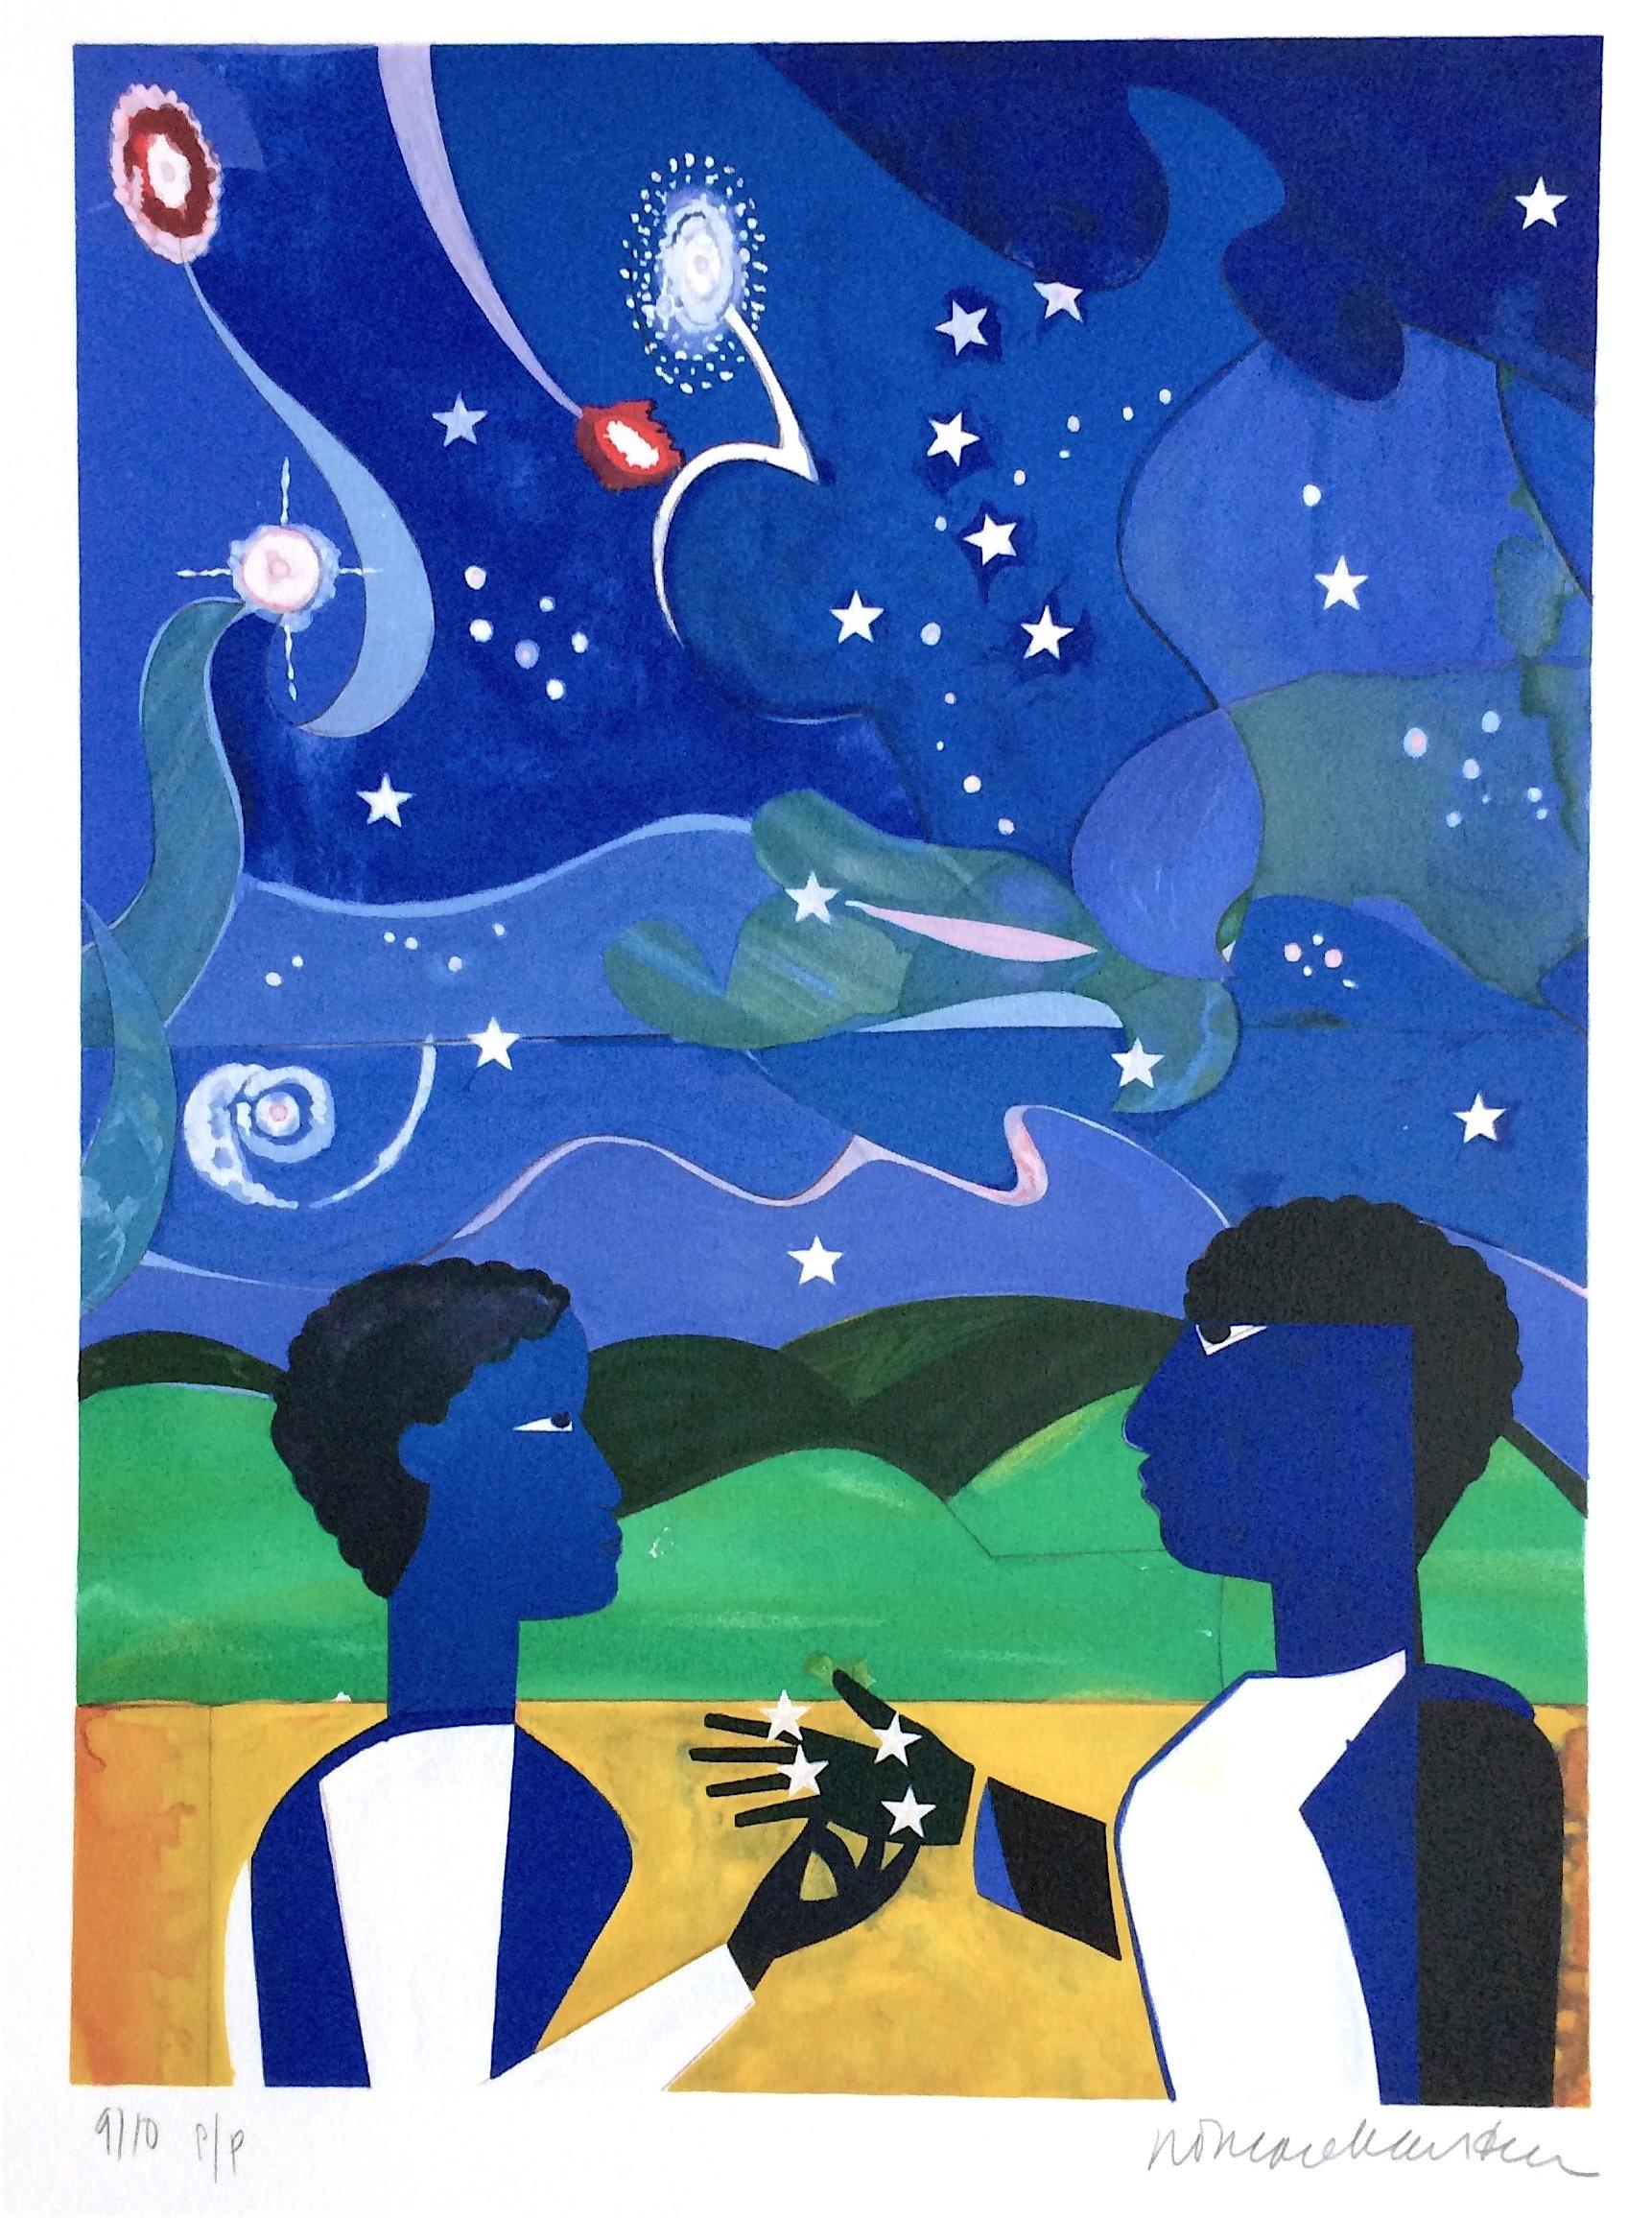 Romare Bearden Landscape Print - TWO WORLDS, FACES OF THE FUTURE Signed Lithograph, Collage Portrait Starry Night